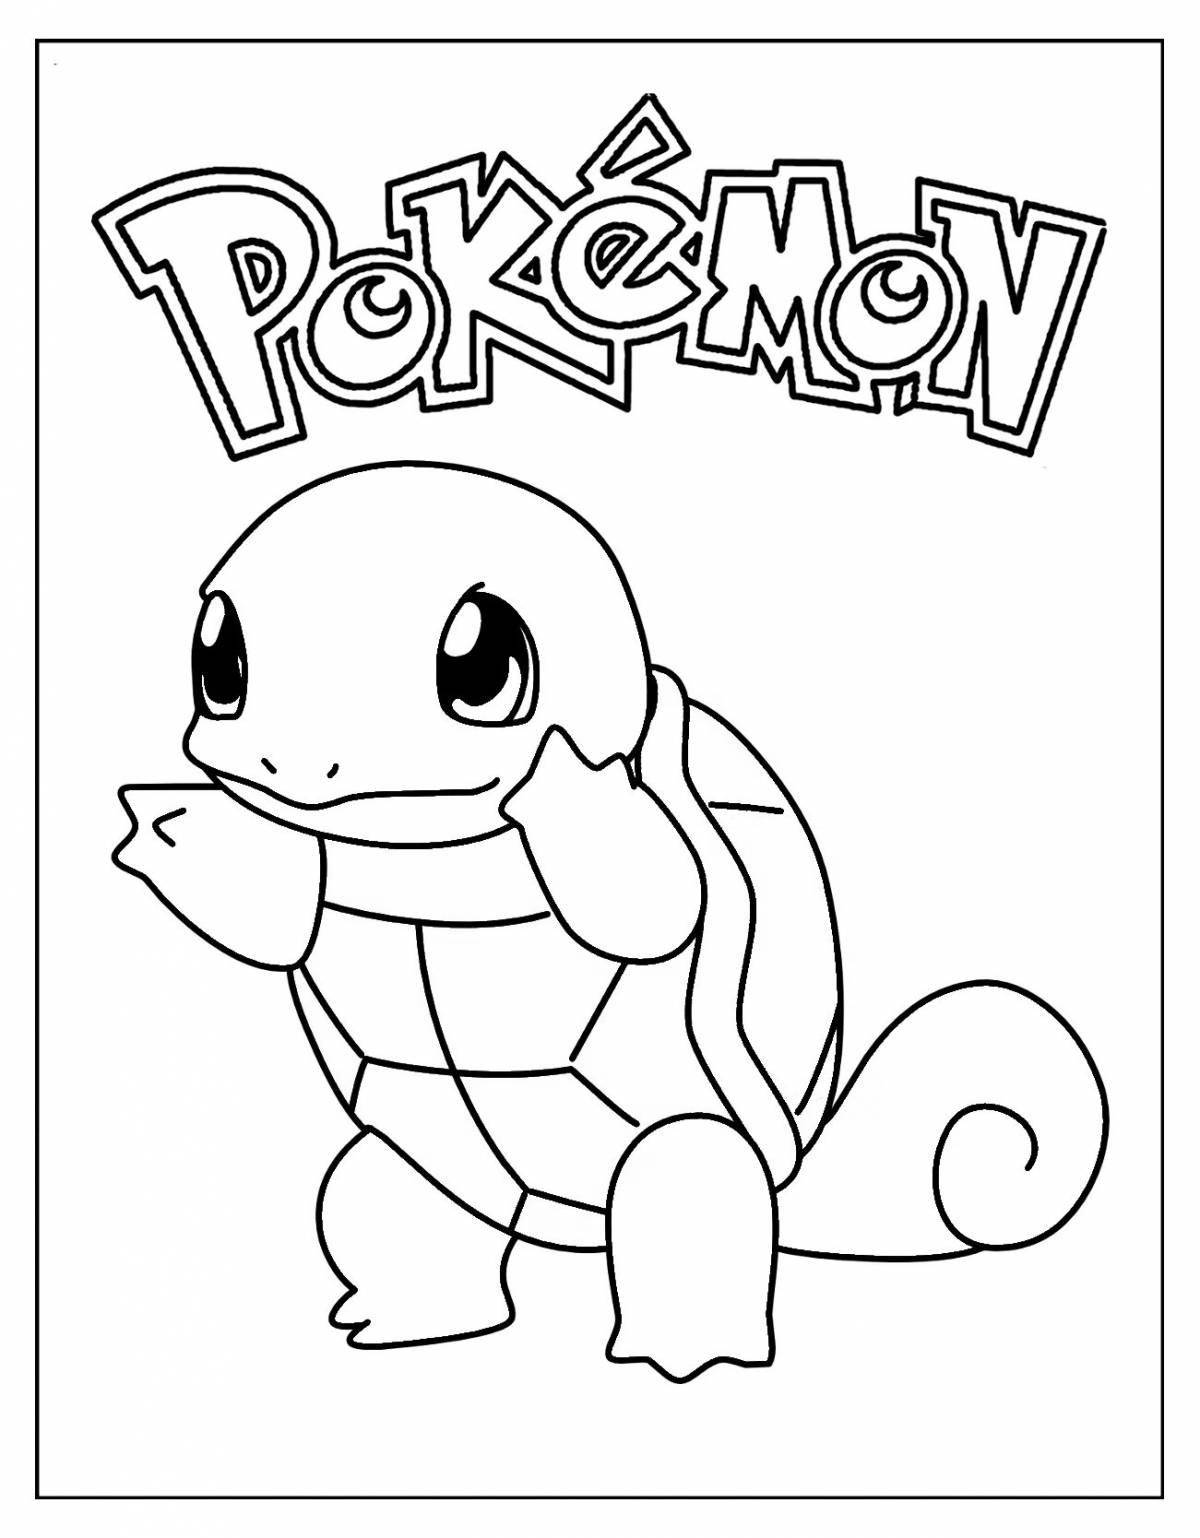 Sweet pokemon coloring book for kids